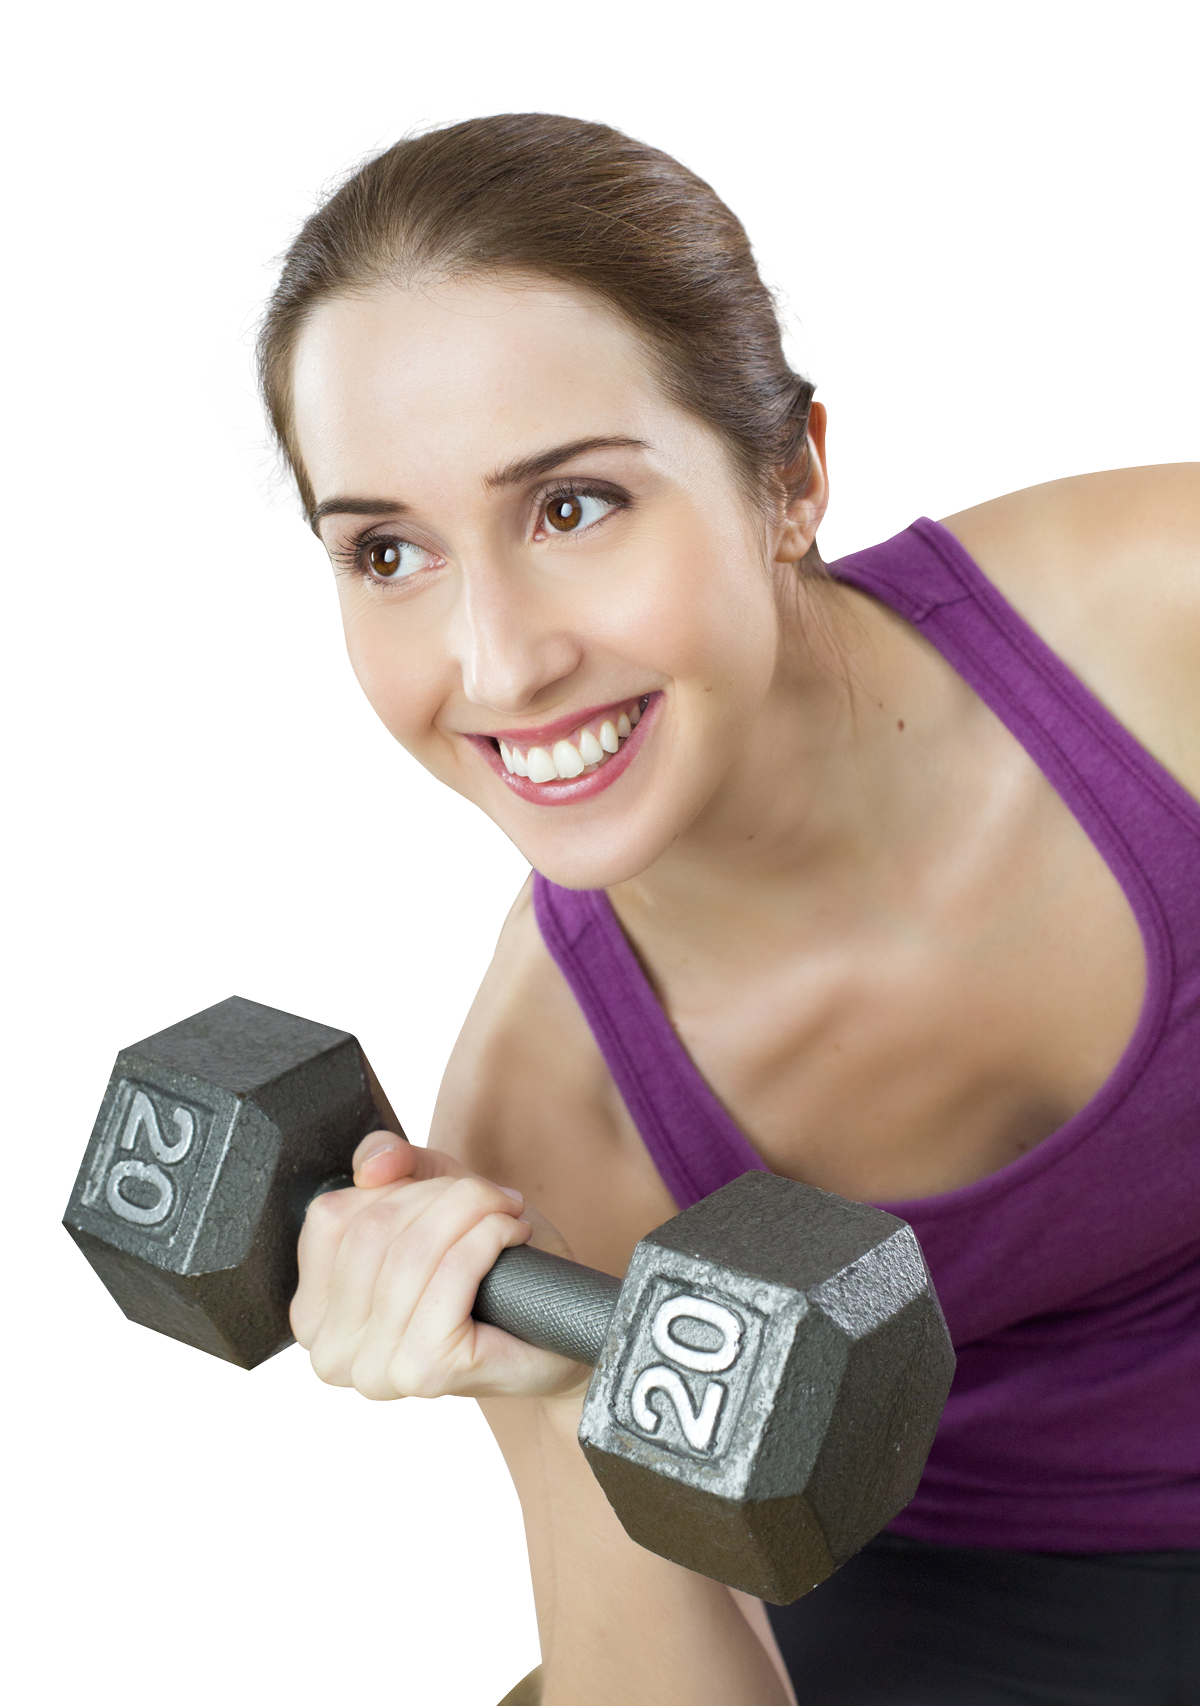 Workout Gym Female Fitness HQ Image Free PNG Image